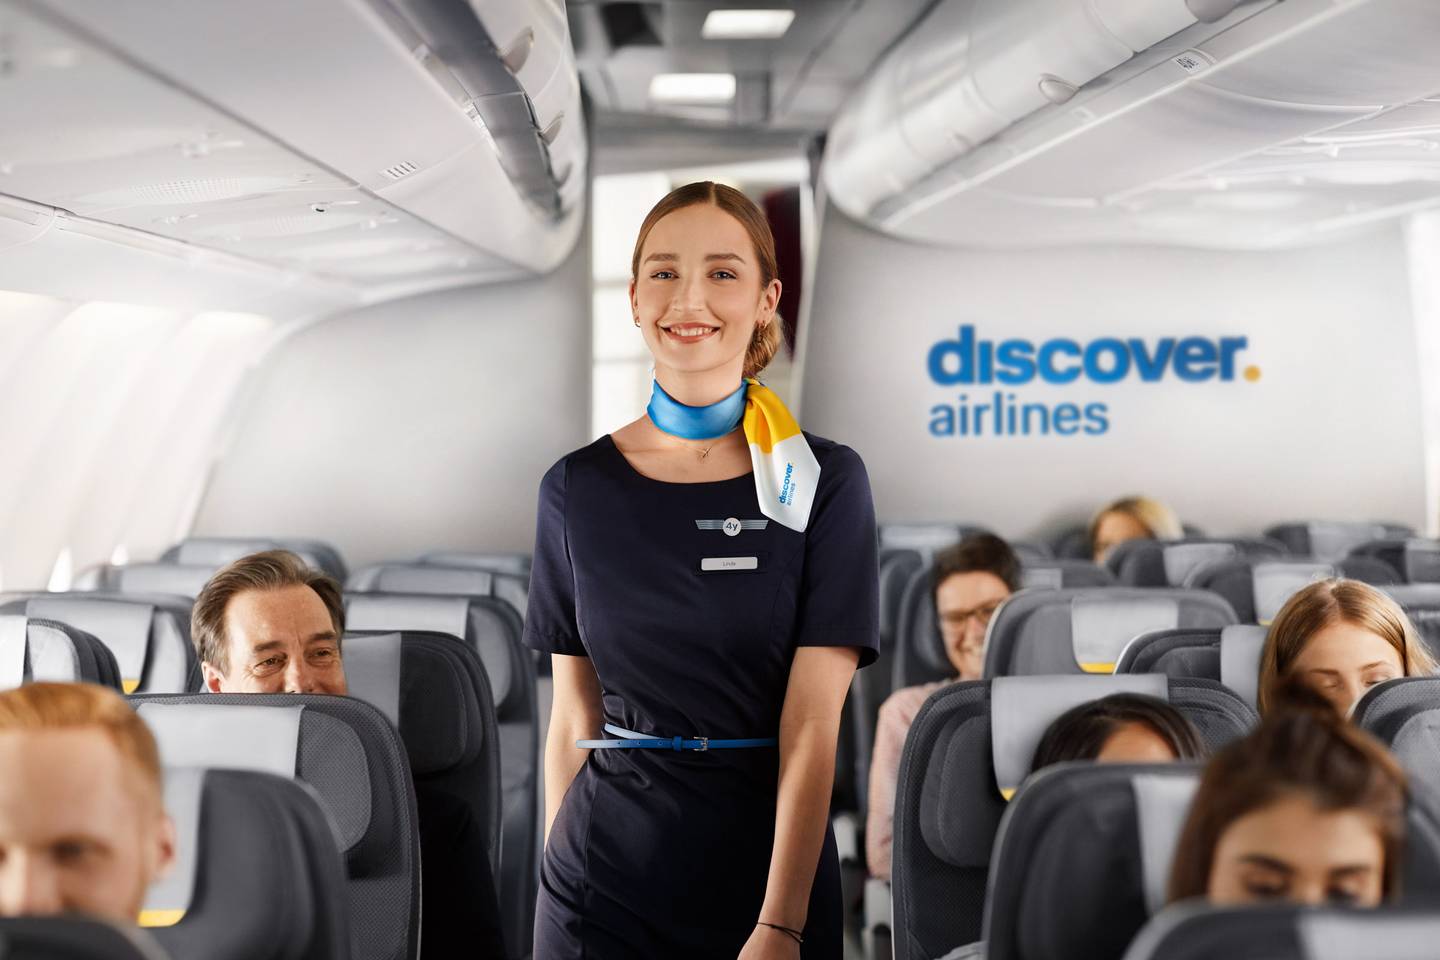 Discover Airlines Flugbegleiterin lacht